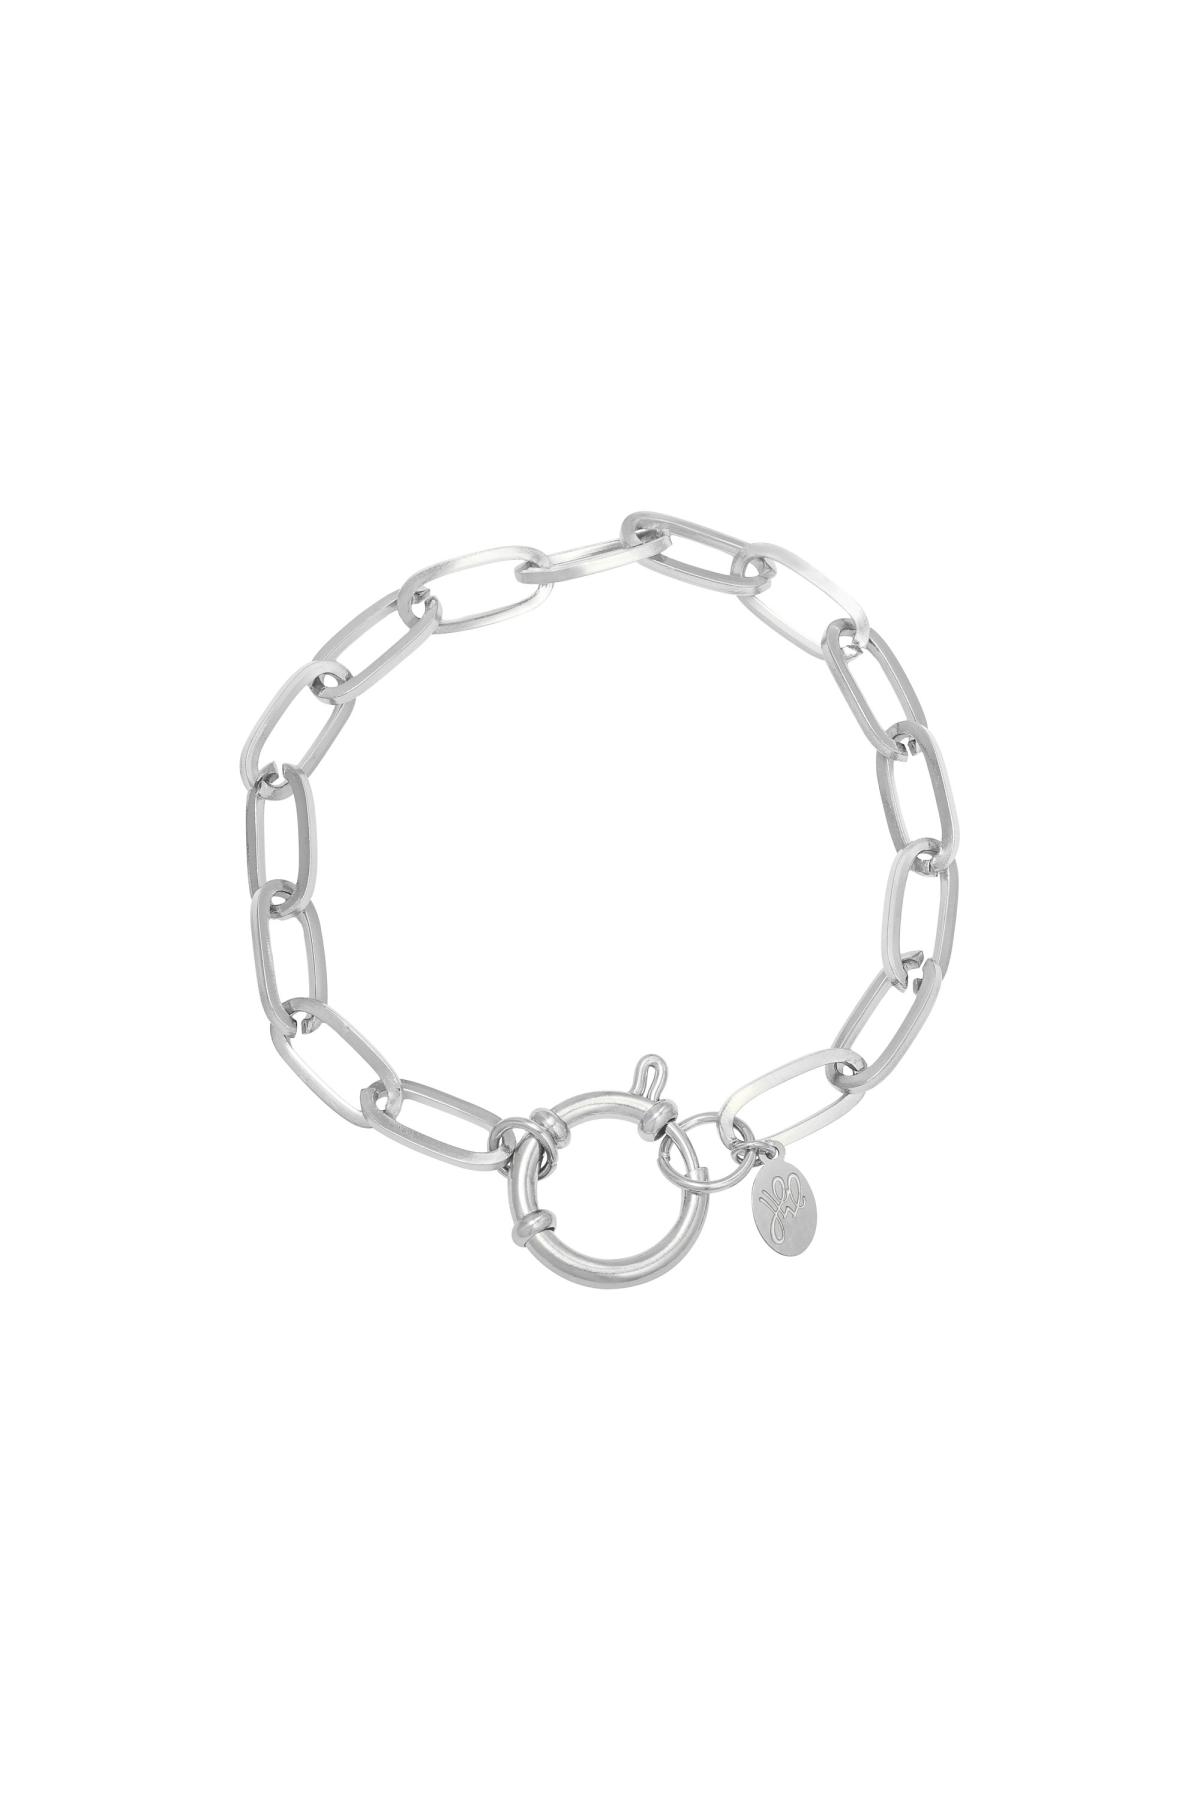 Bracelet Chain Eve Silver Stainless Steel 